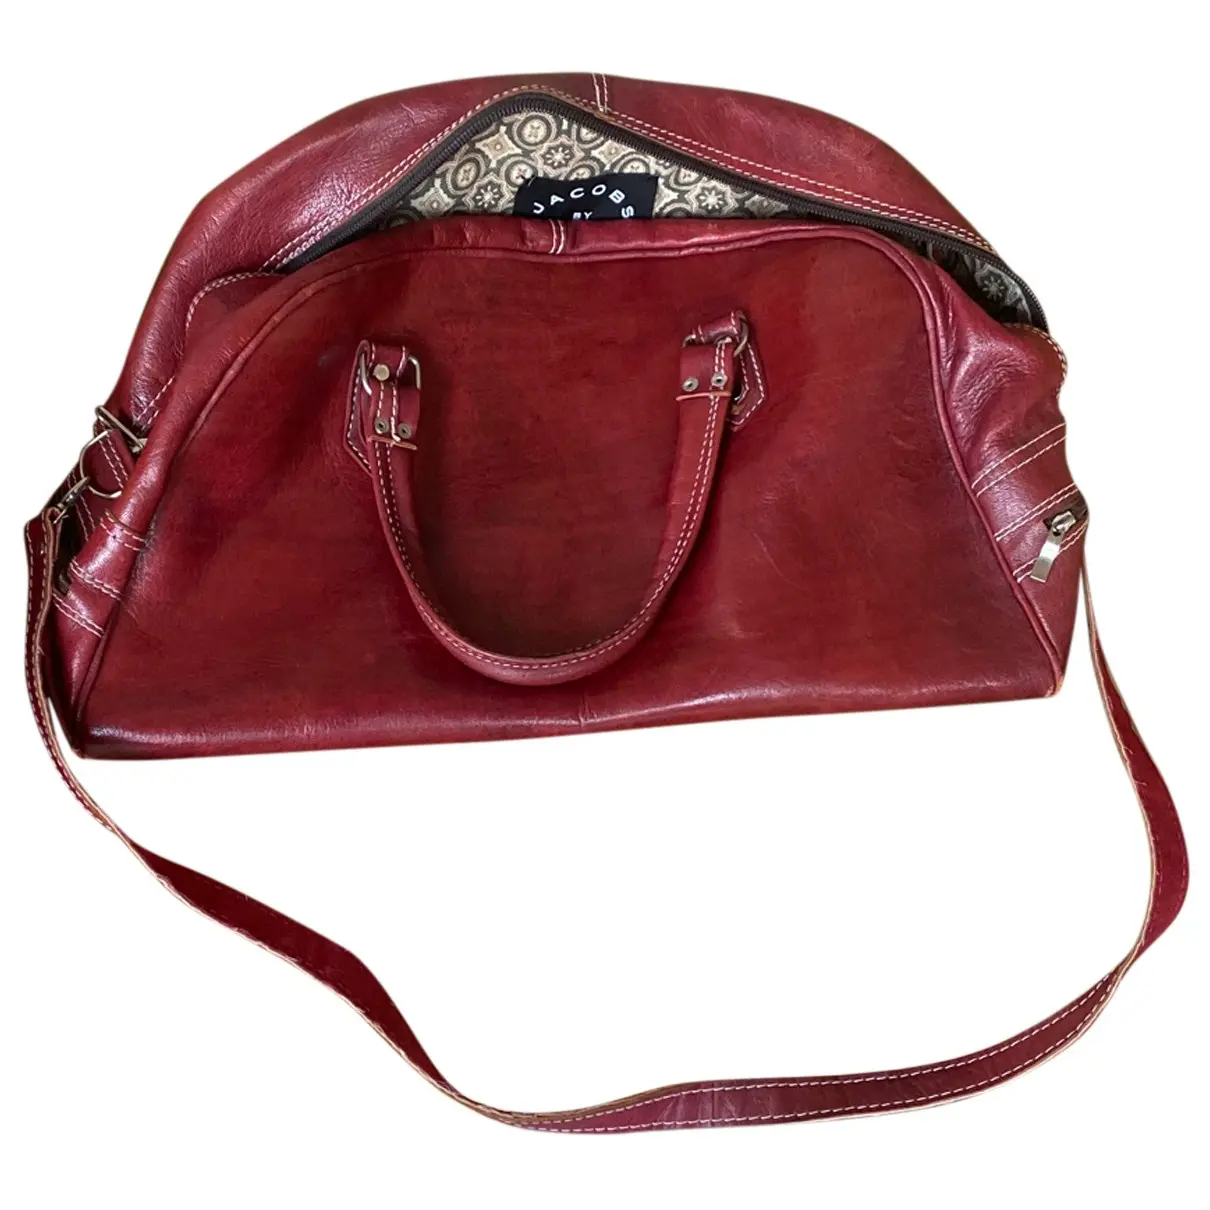 Patent leather weekend bag Marc Jacobs